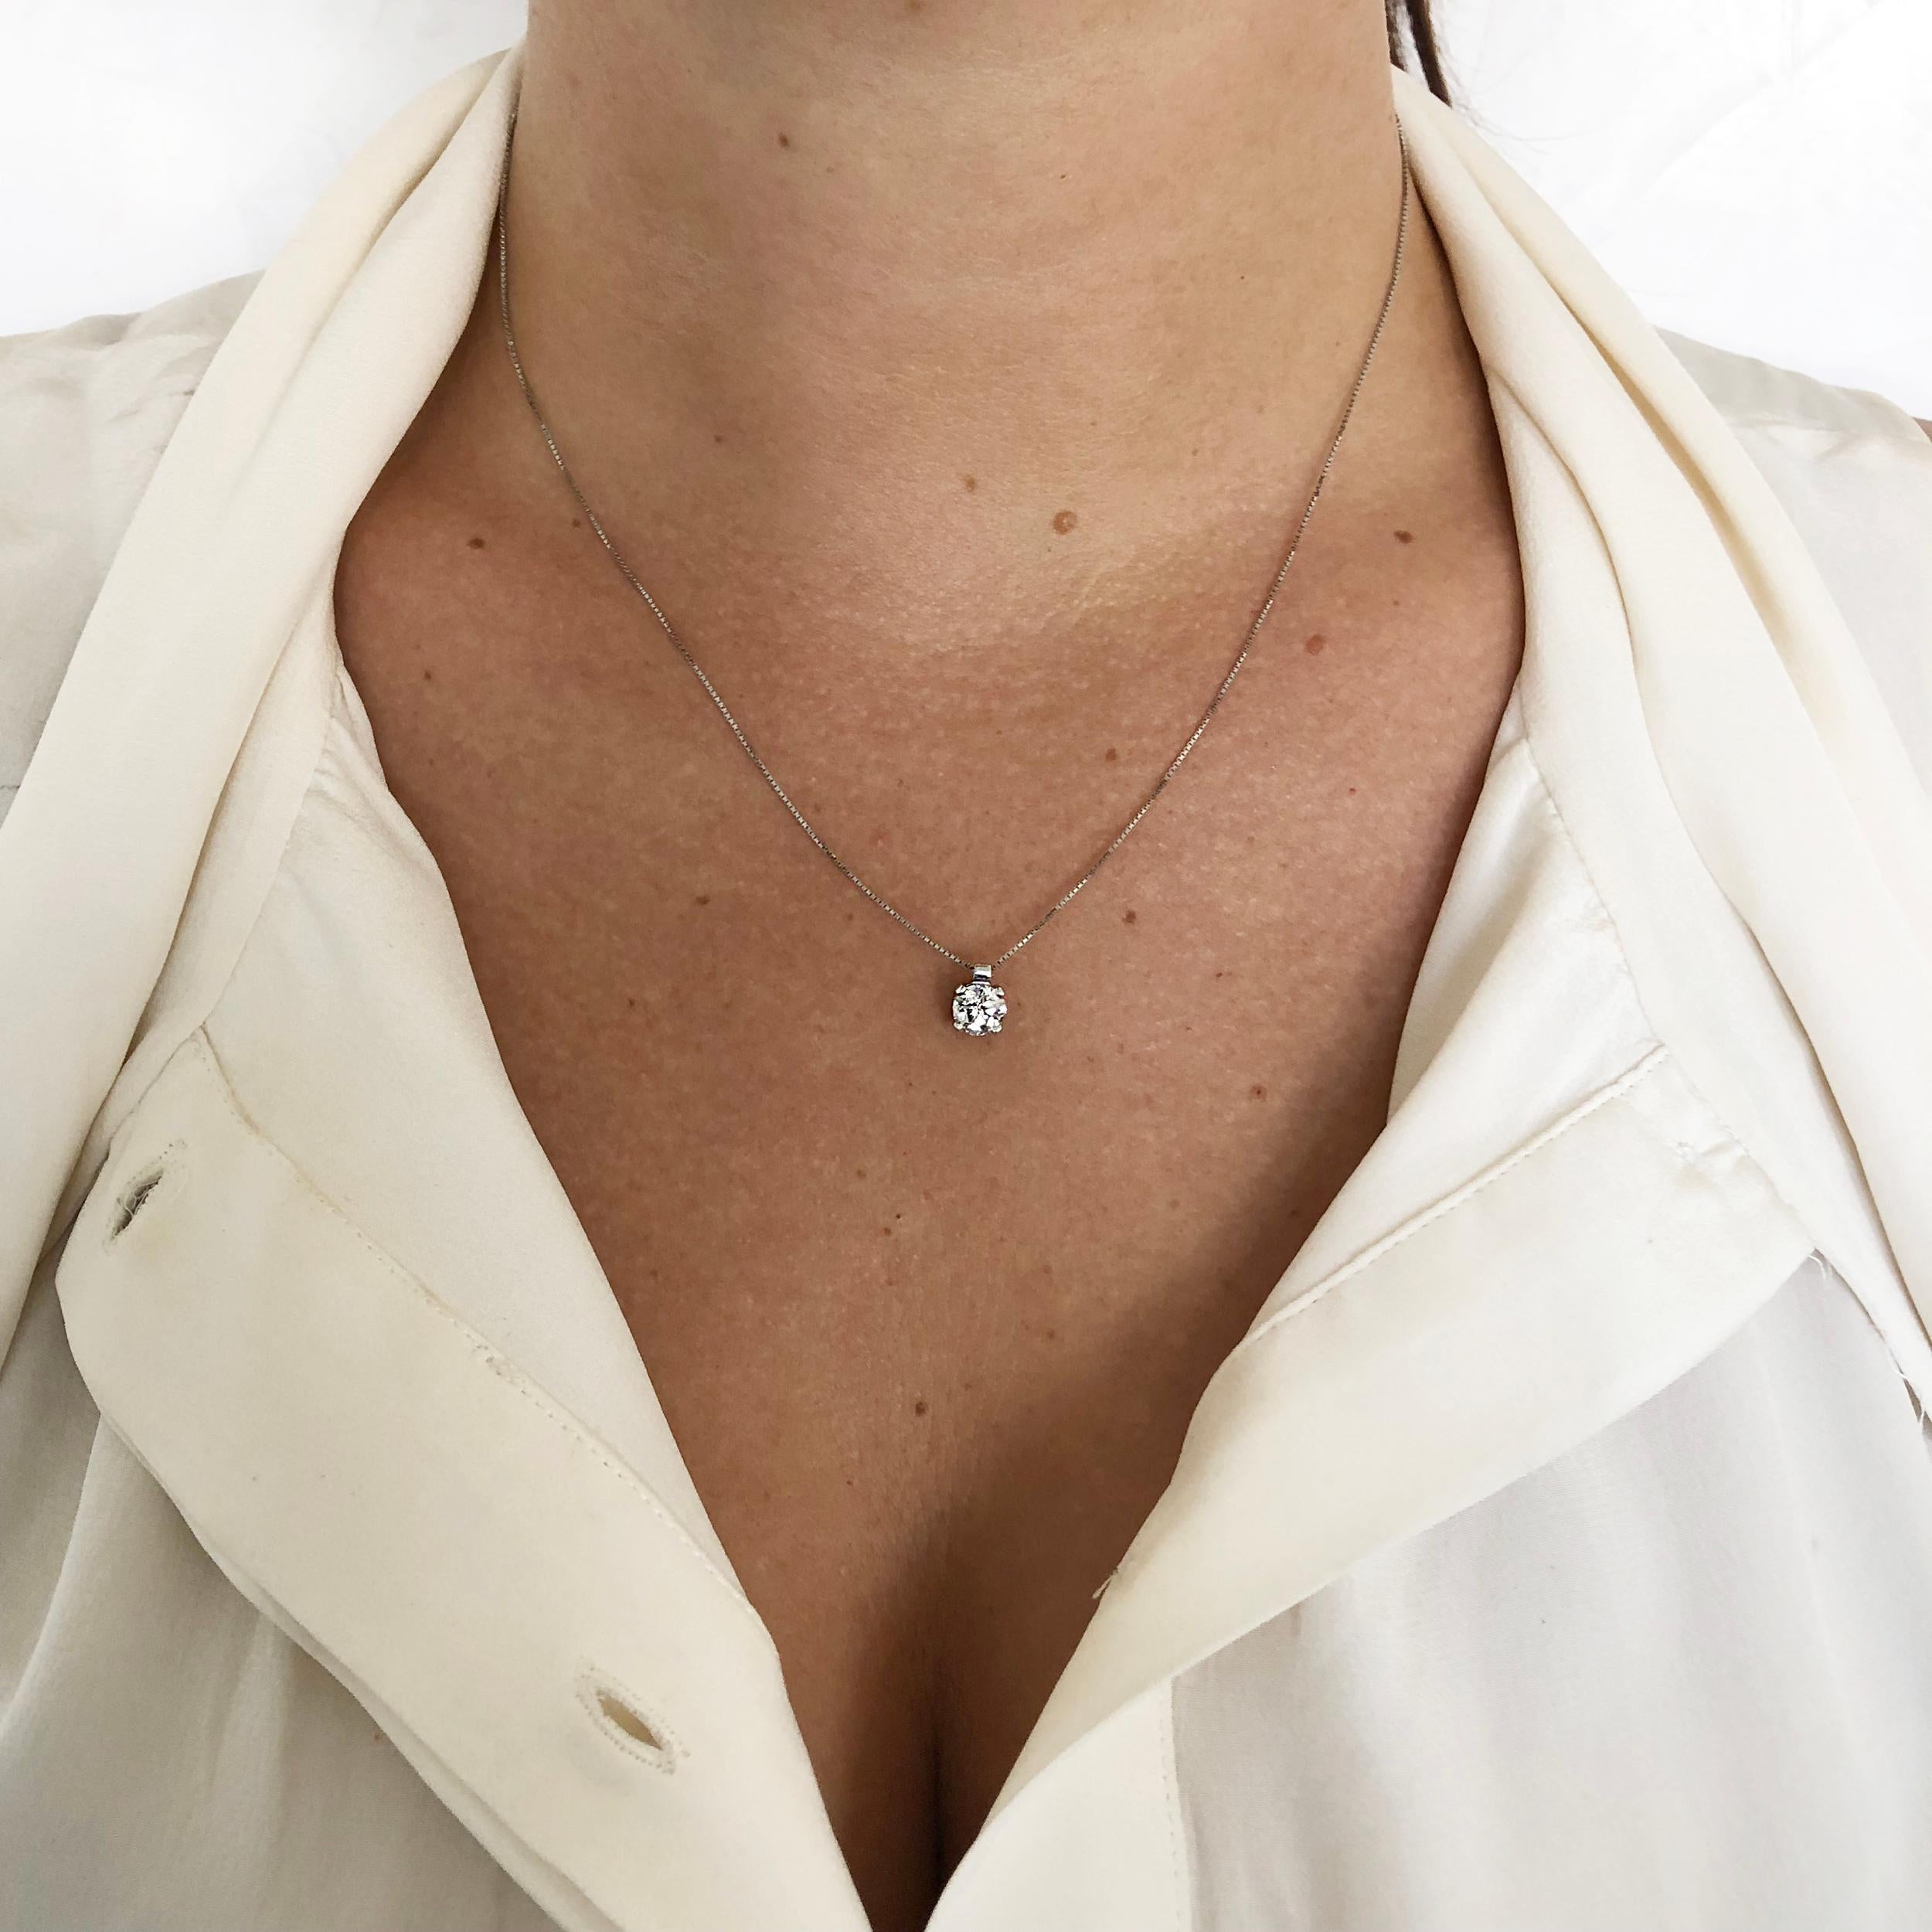 This IGI Certified 0.89 Carat Round Diamond Pendant Necklace, boasts a beautiful Leonardo da Vinci Cut Diamond. 

The only Diamond in the world cut using the Divine Proportions, offering a brightness and beauty unlike any other cut. 

Set on a 18Kt